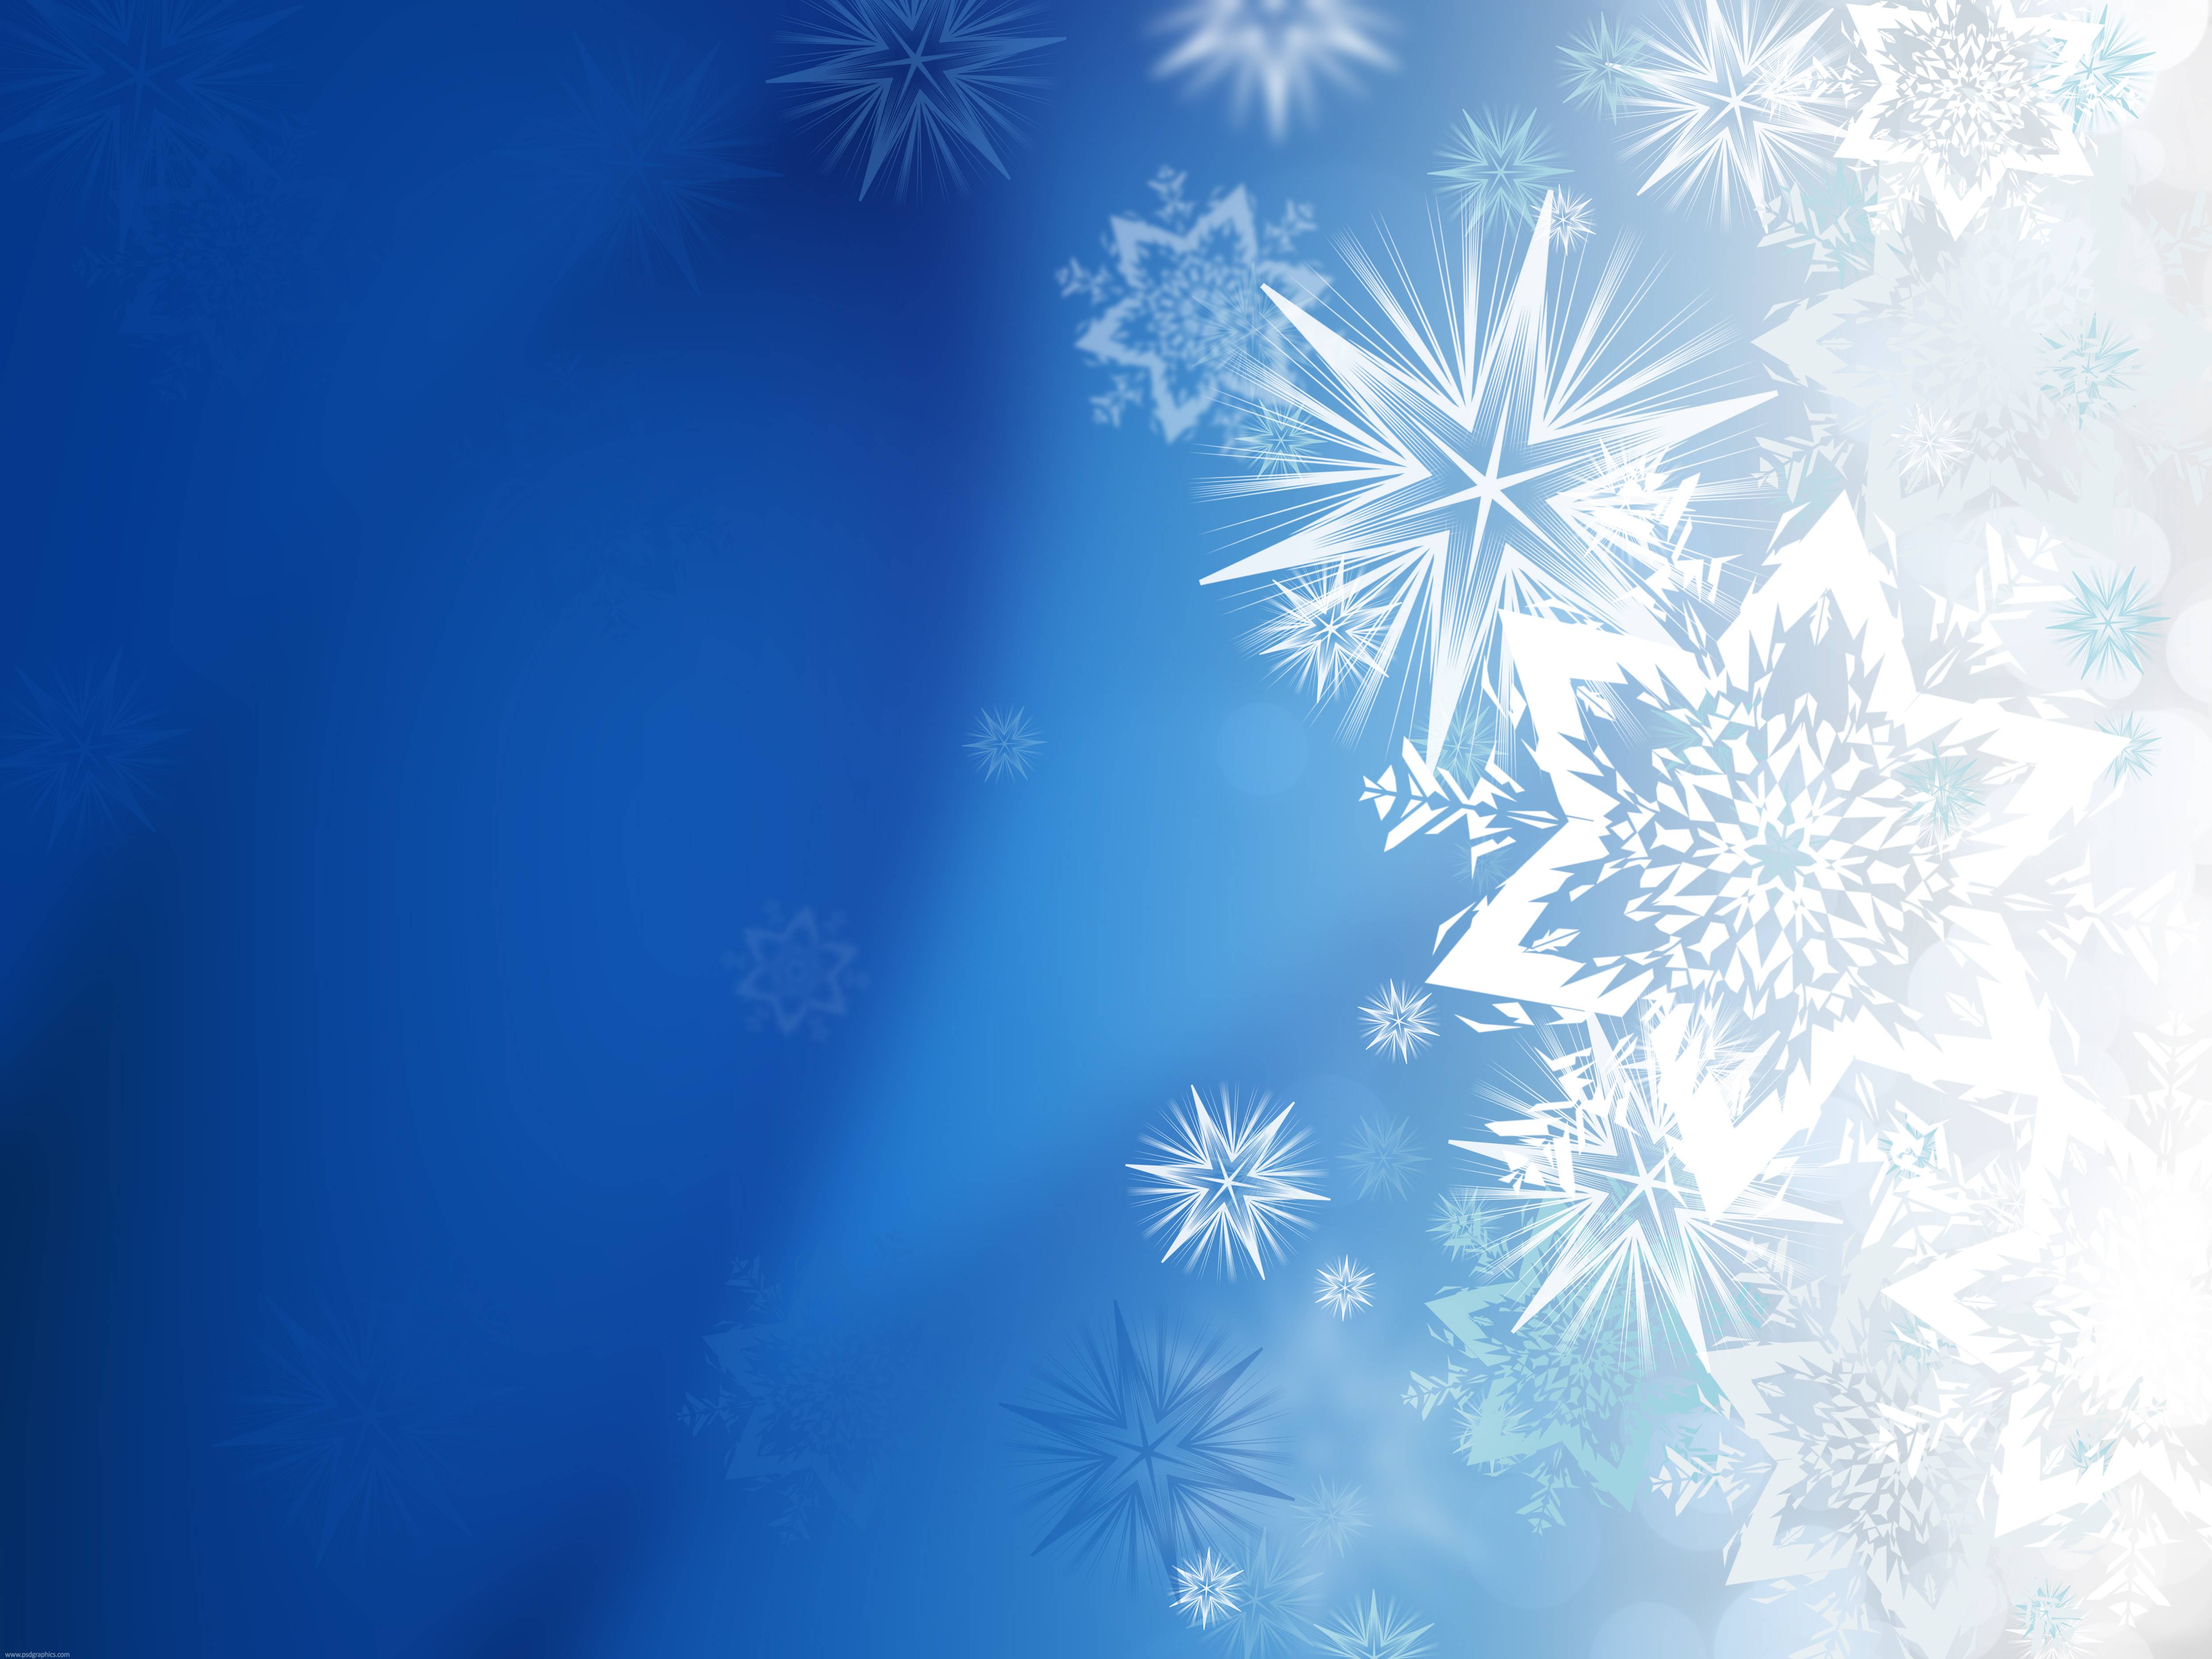 Abstract winter design